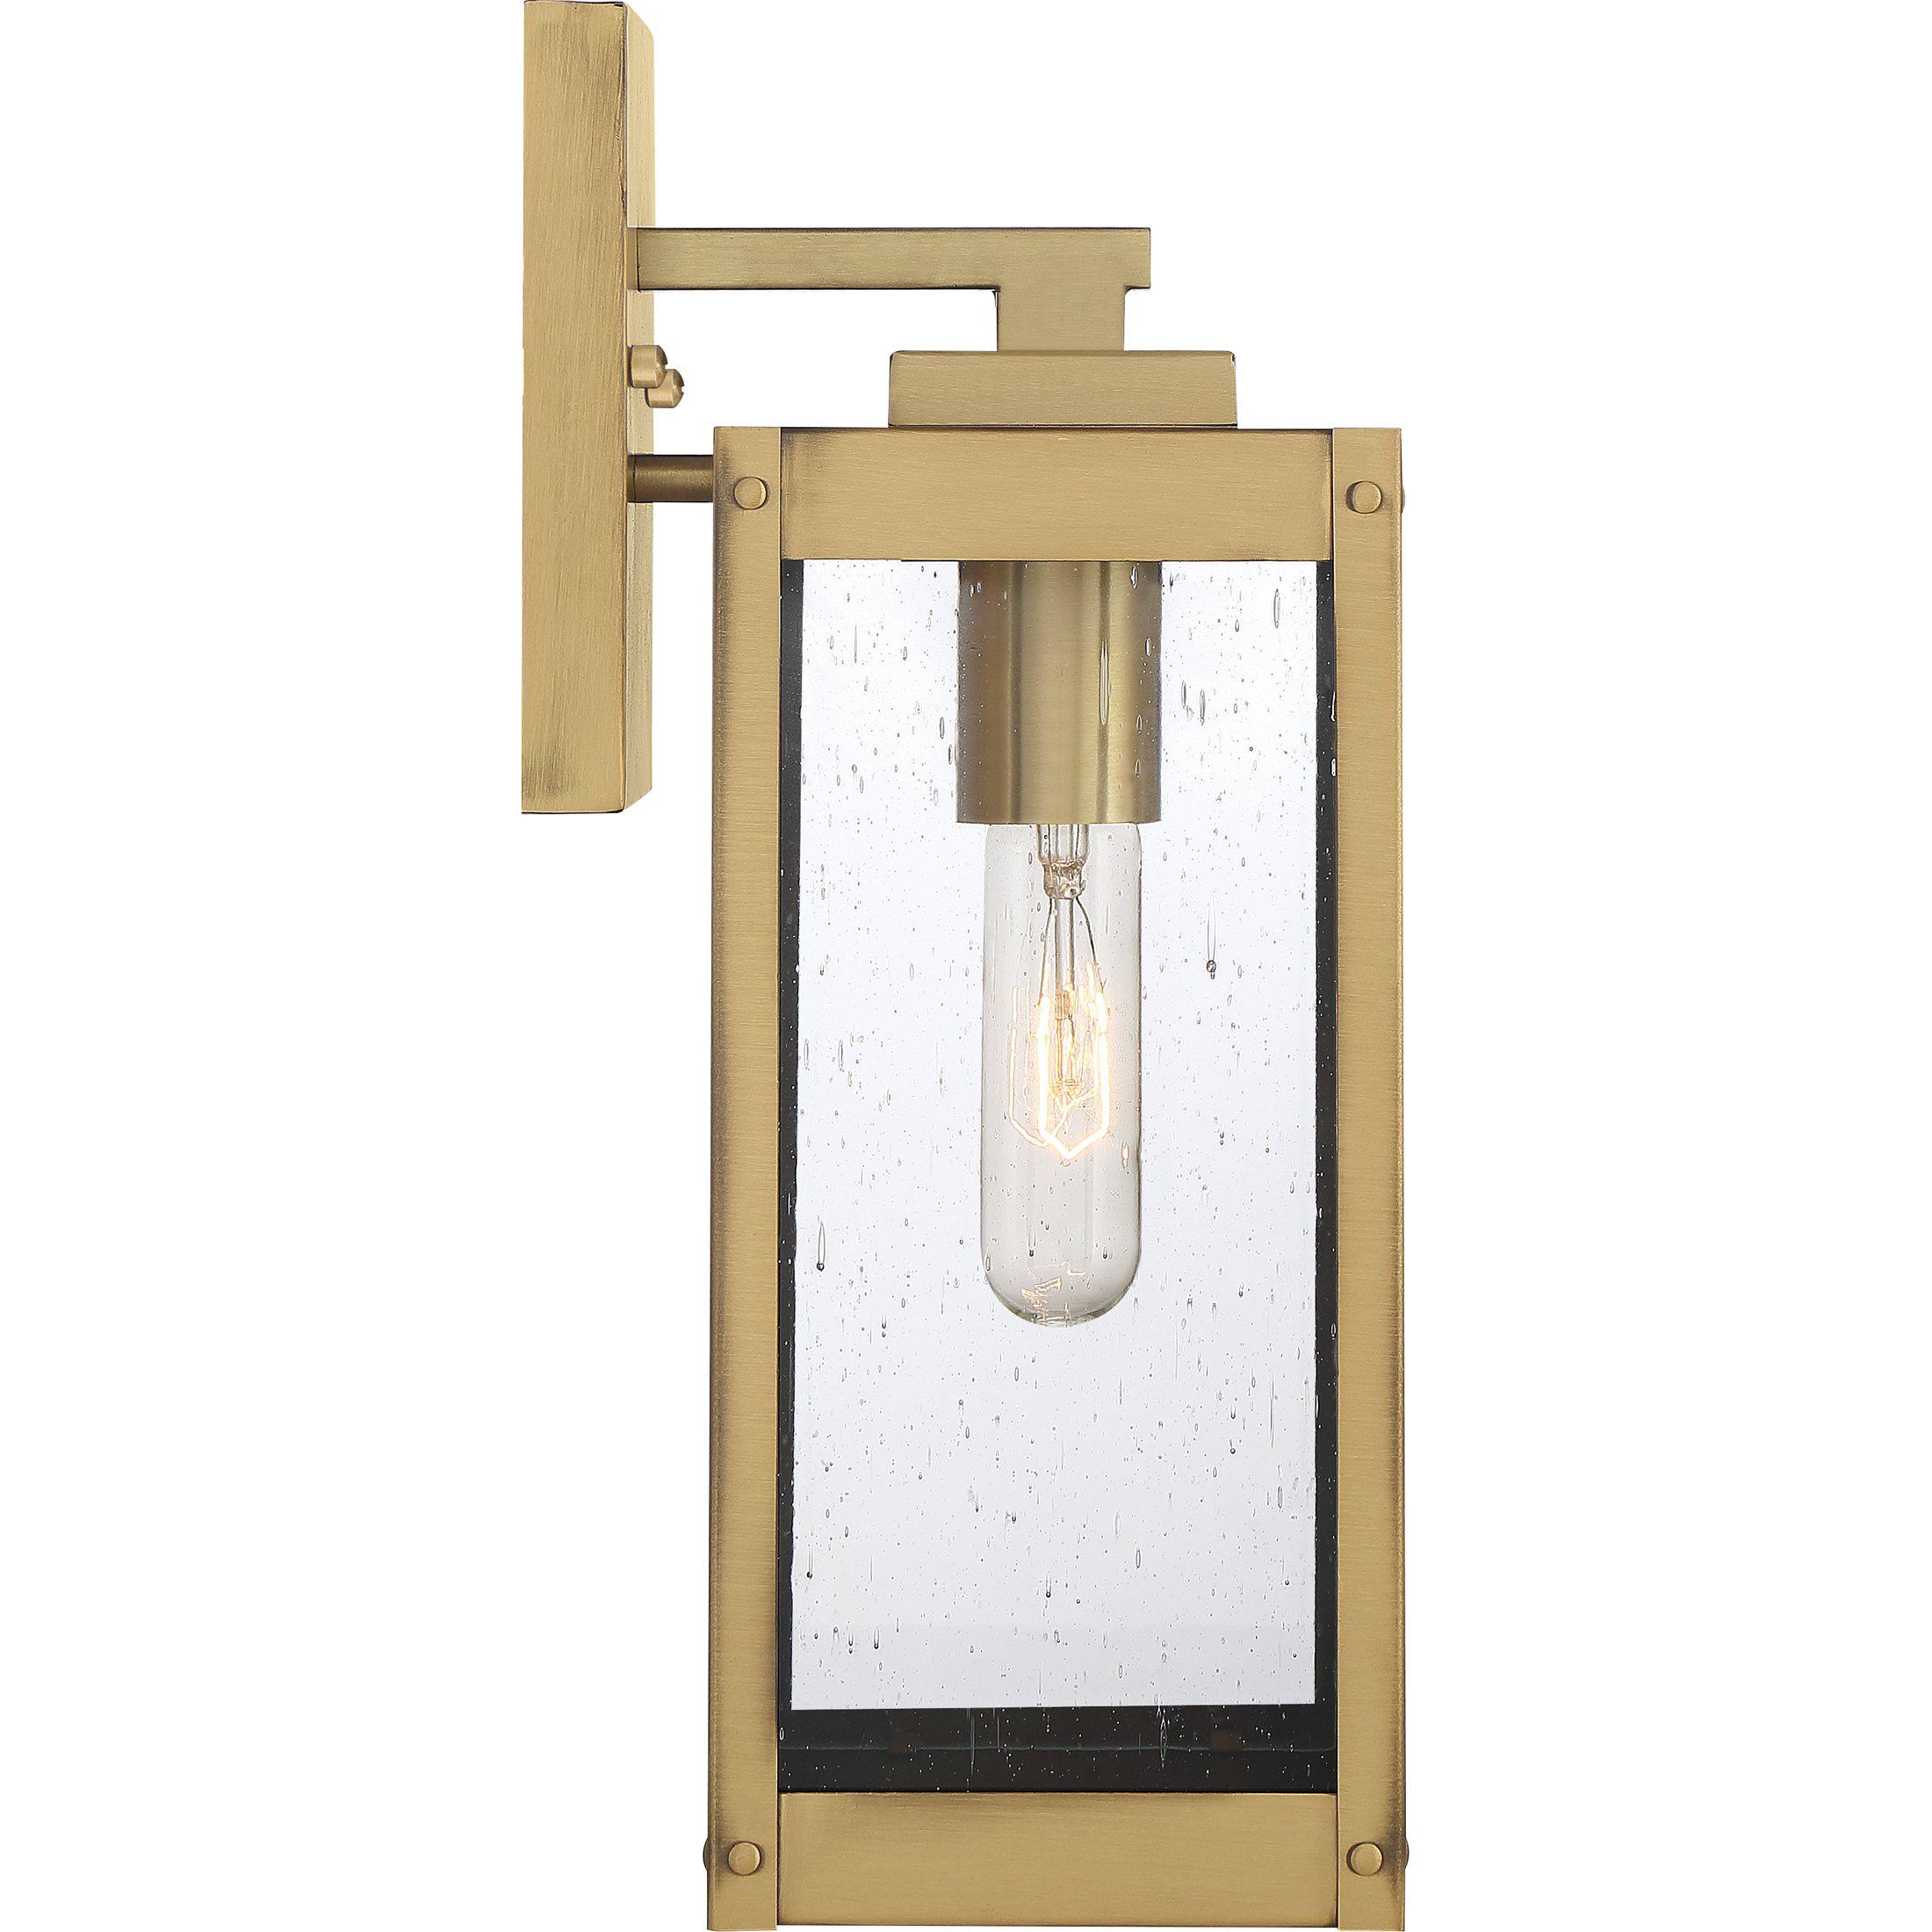 Quoizel  Westover Outdoor Lantern, Small WVR8405 Outdoor l Wall Quoizel   